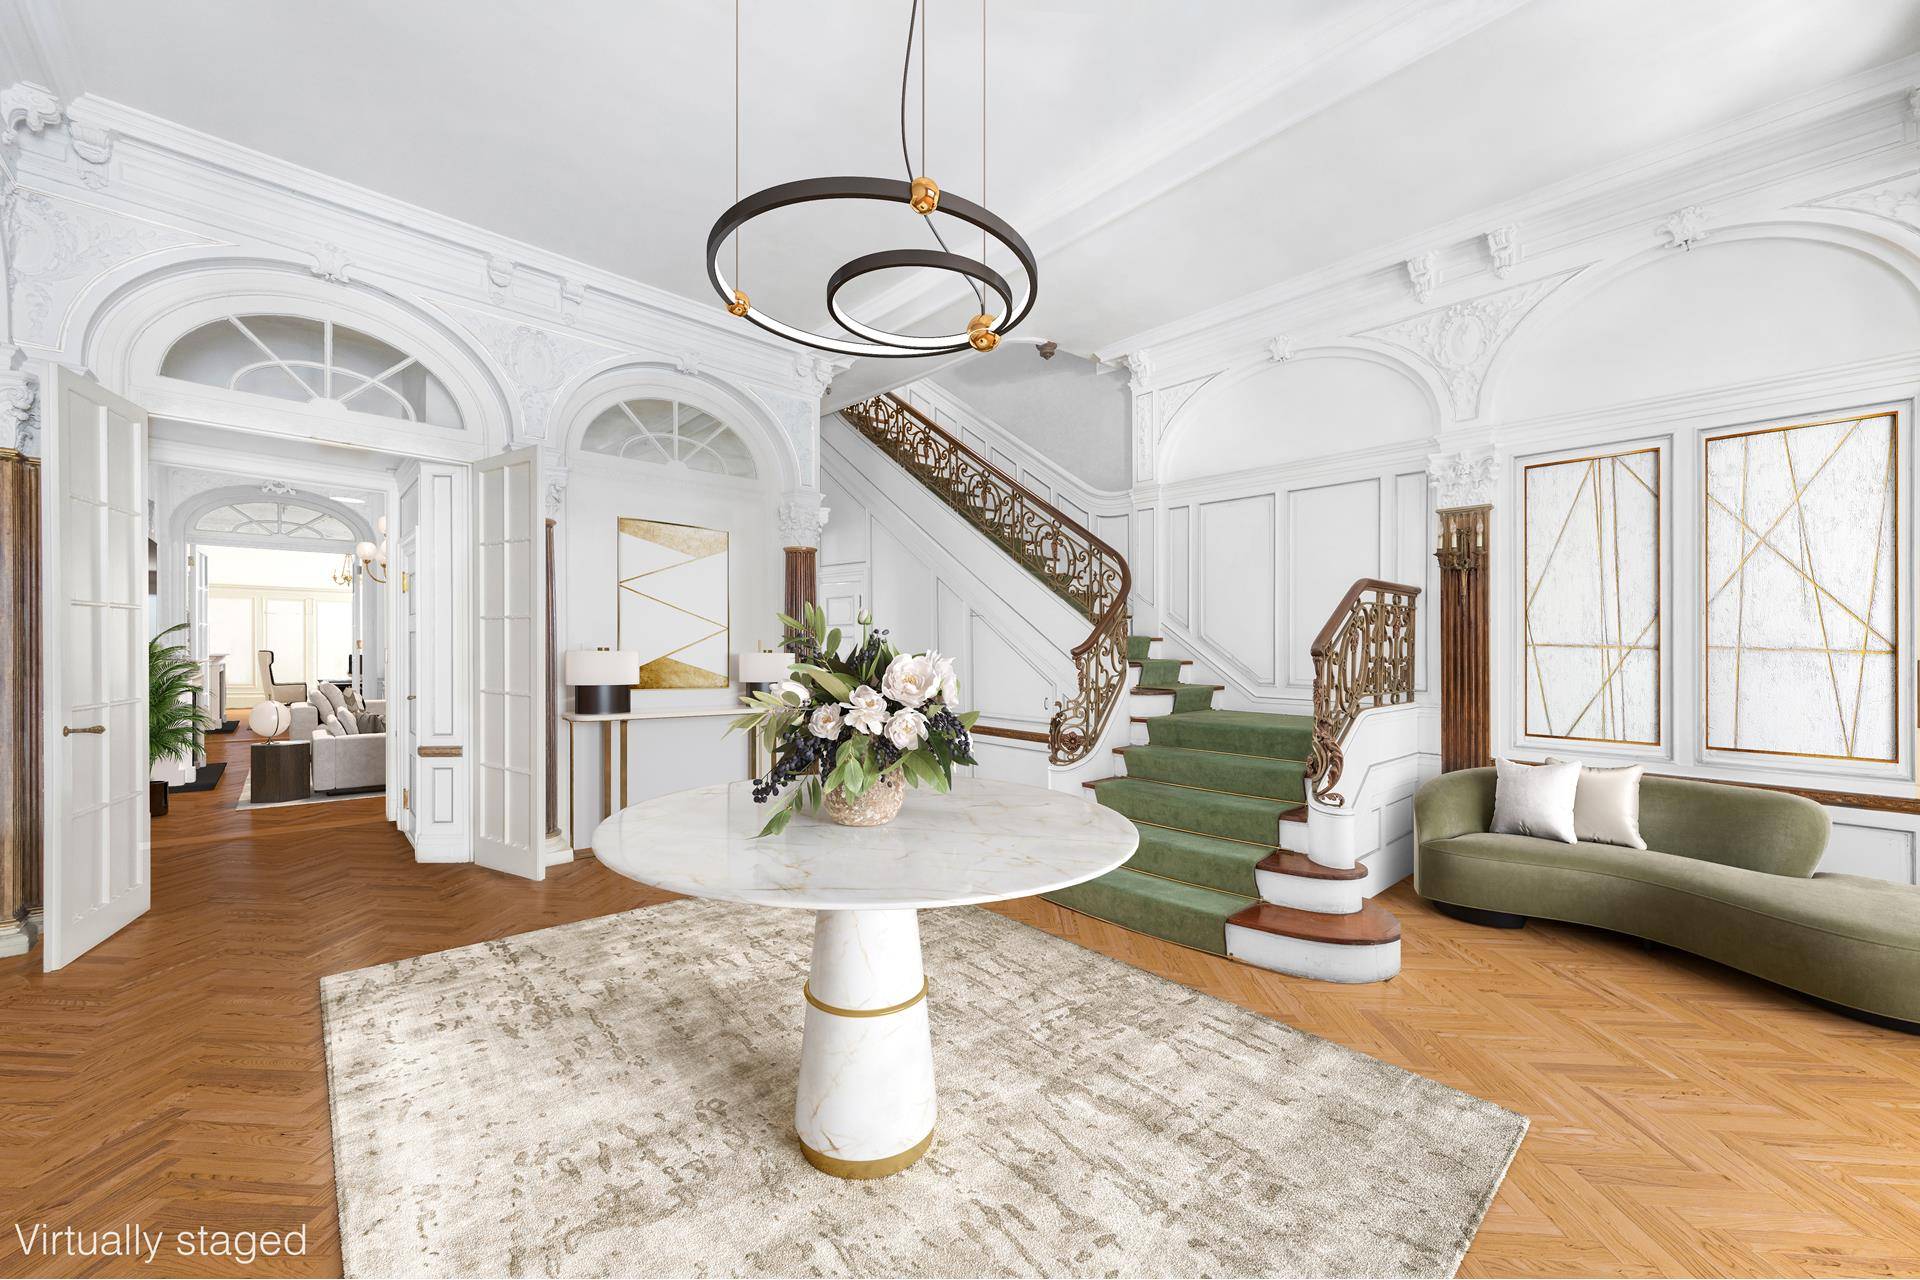 Built in 1881 as a Victorian era brownstone, the home, known as The Block House, was thoroughly remodeled by the esteemed Henry Herts in 1906.